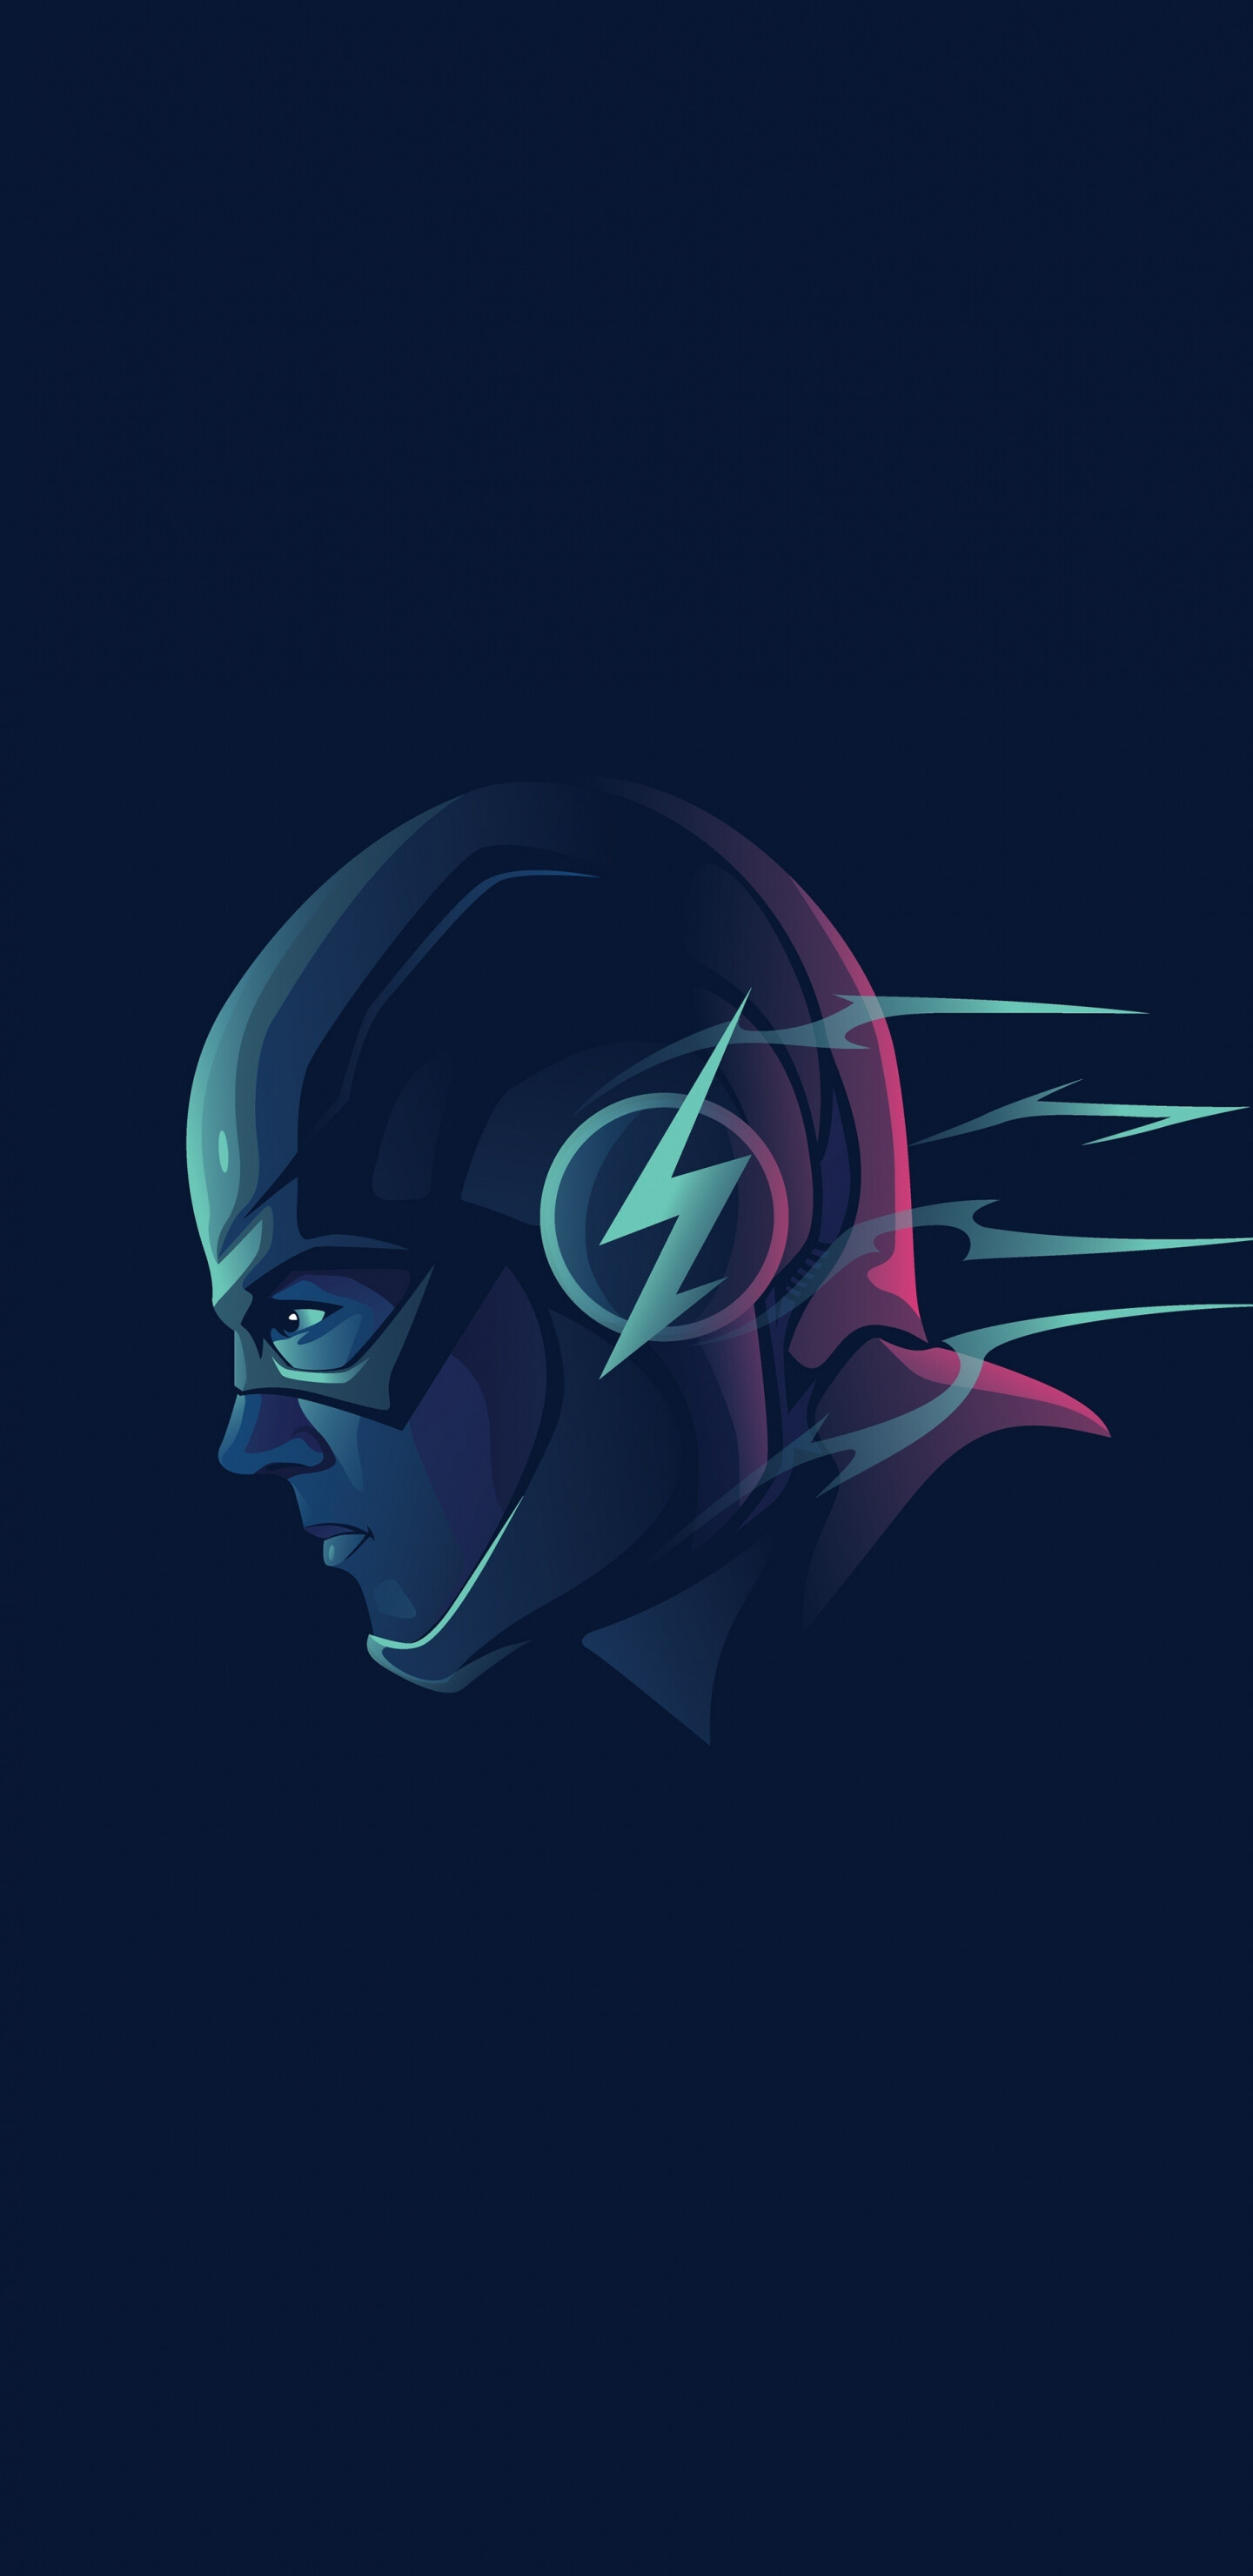 Flash (DC): Jay Garrick, A founding member of the Justice Society of America. 1440x2960 HD Wallpaper.